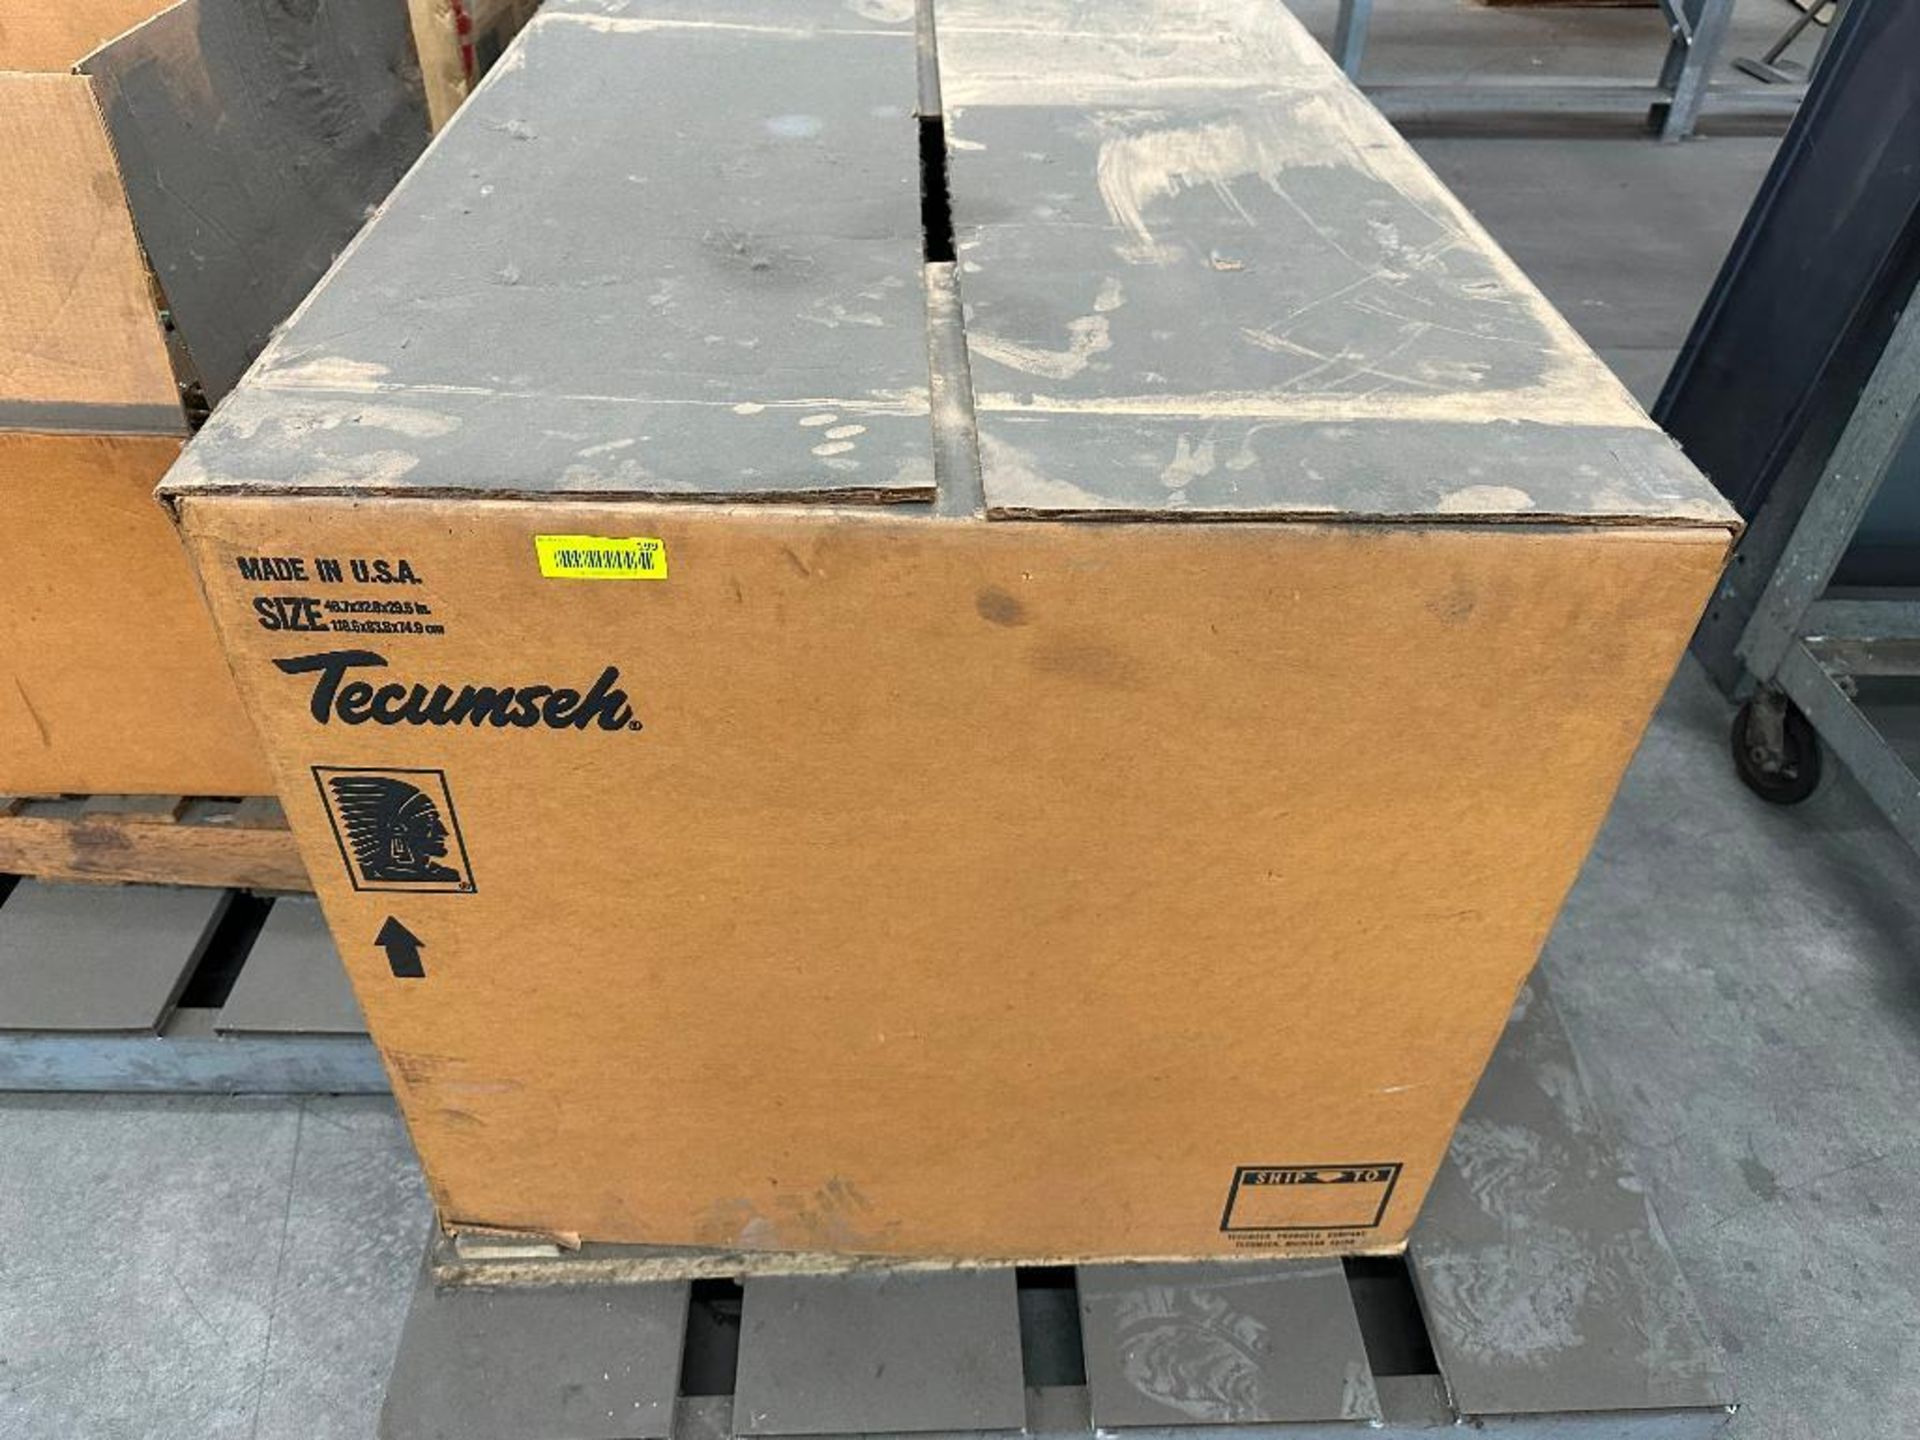 LARGE TECUMSEH CONDENSING UNIT (NEW) IN THE BOX - Image 2 of 5